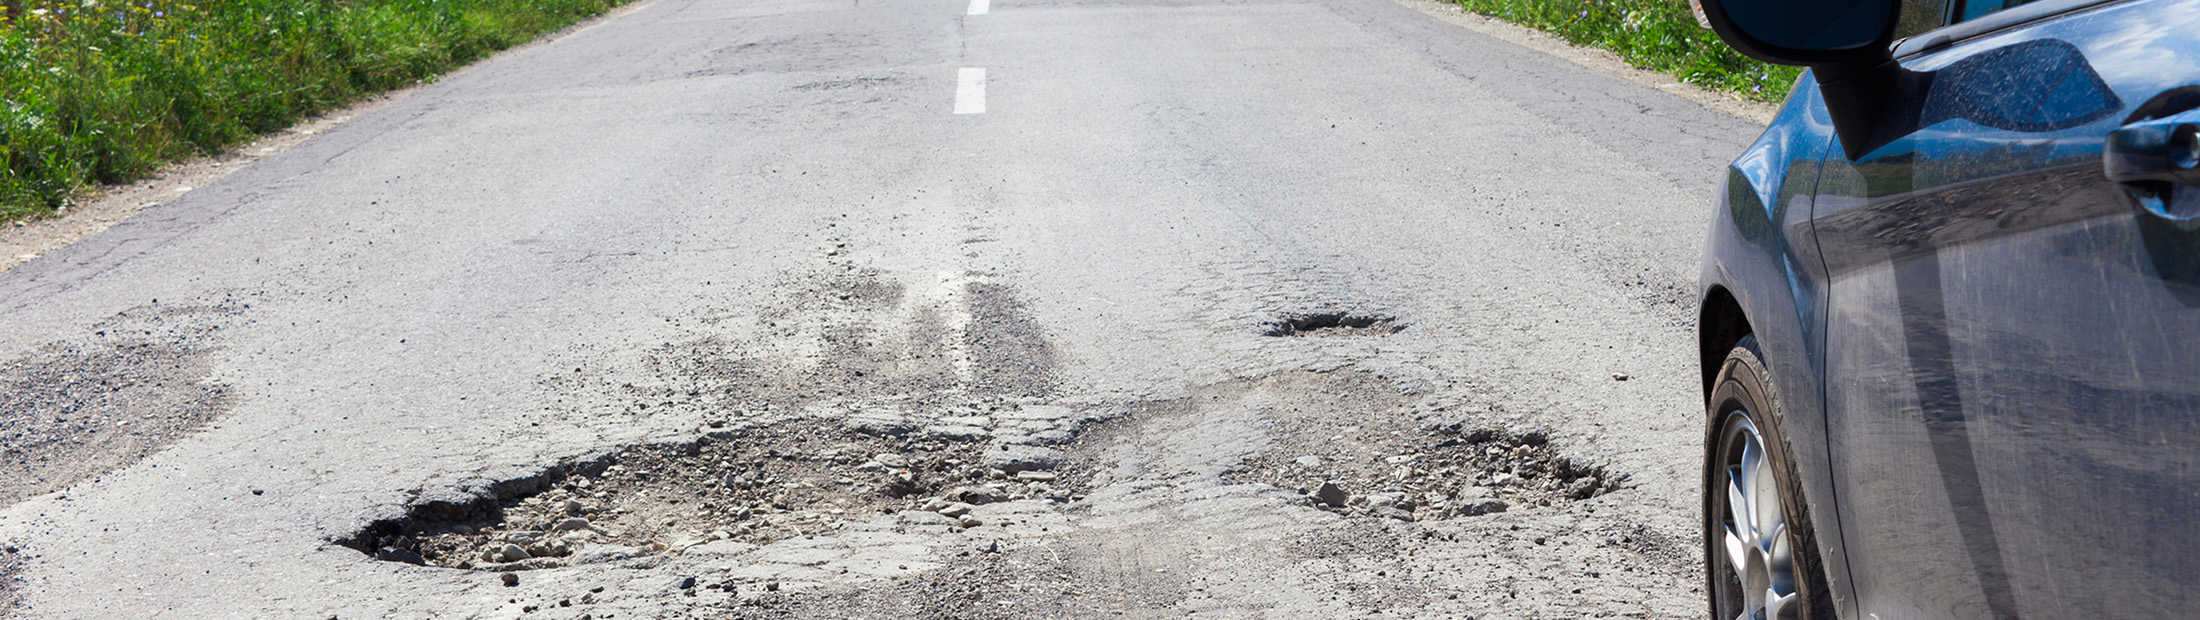 Featured image of road with potholes